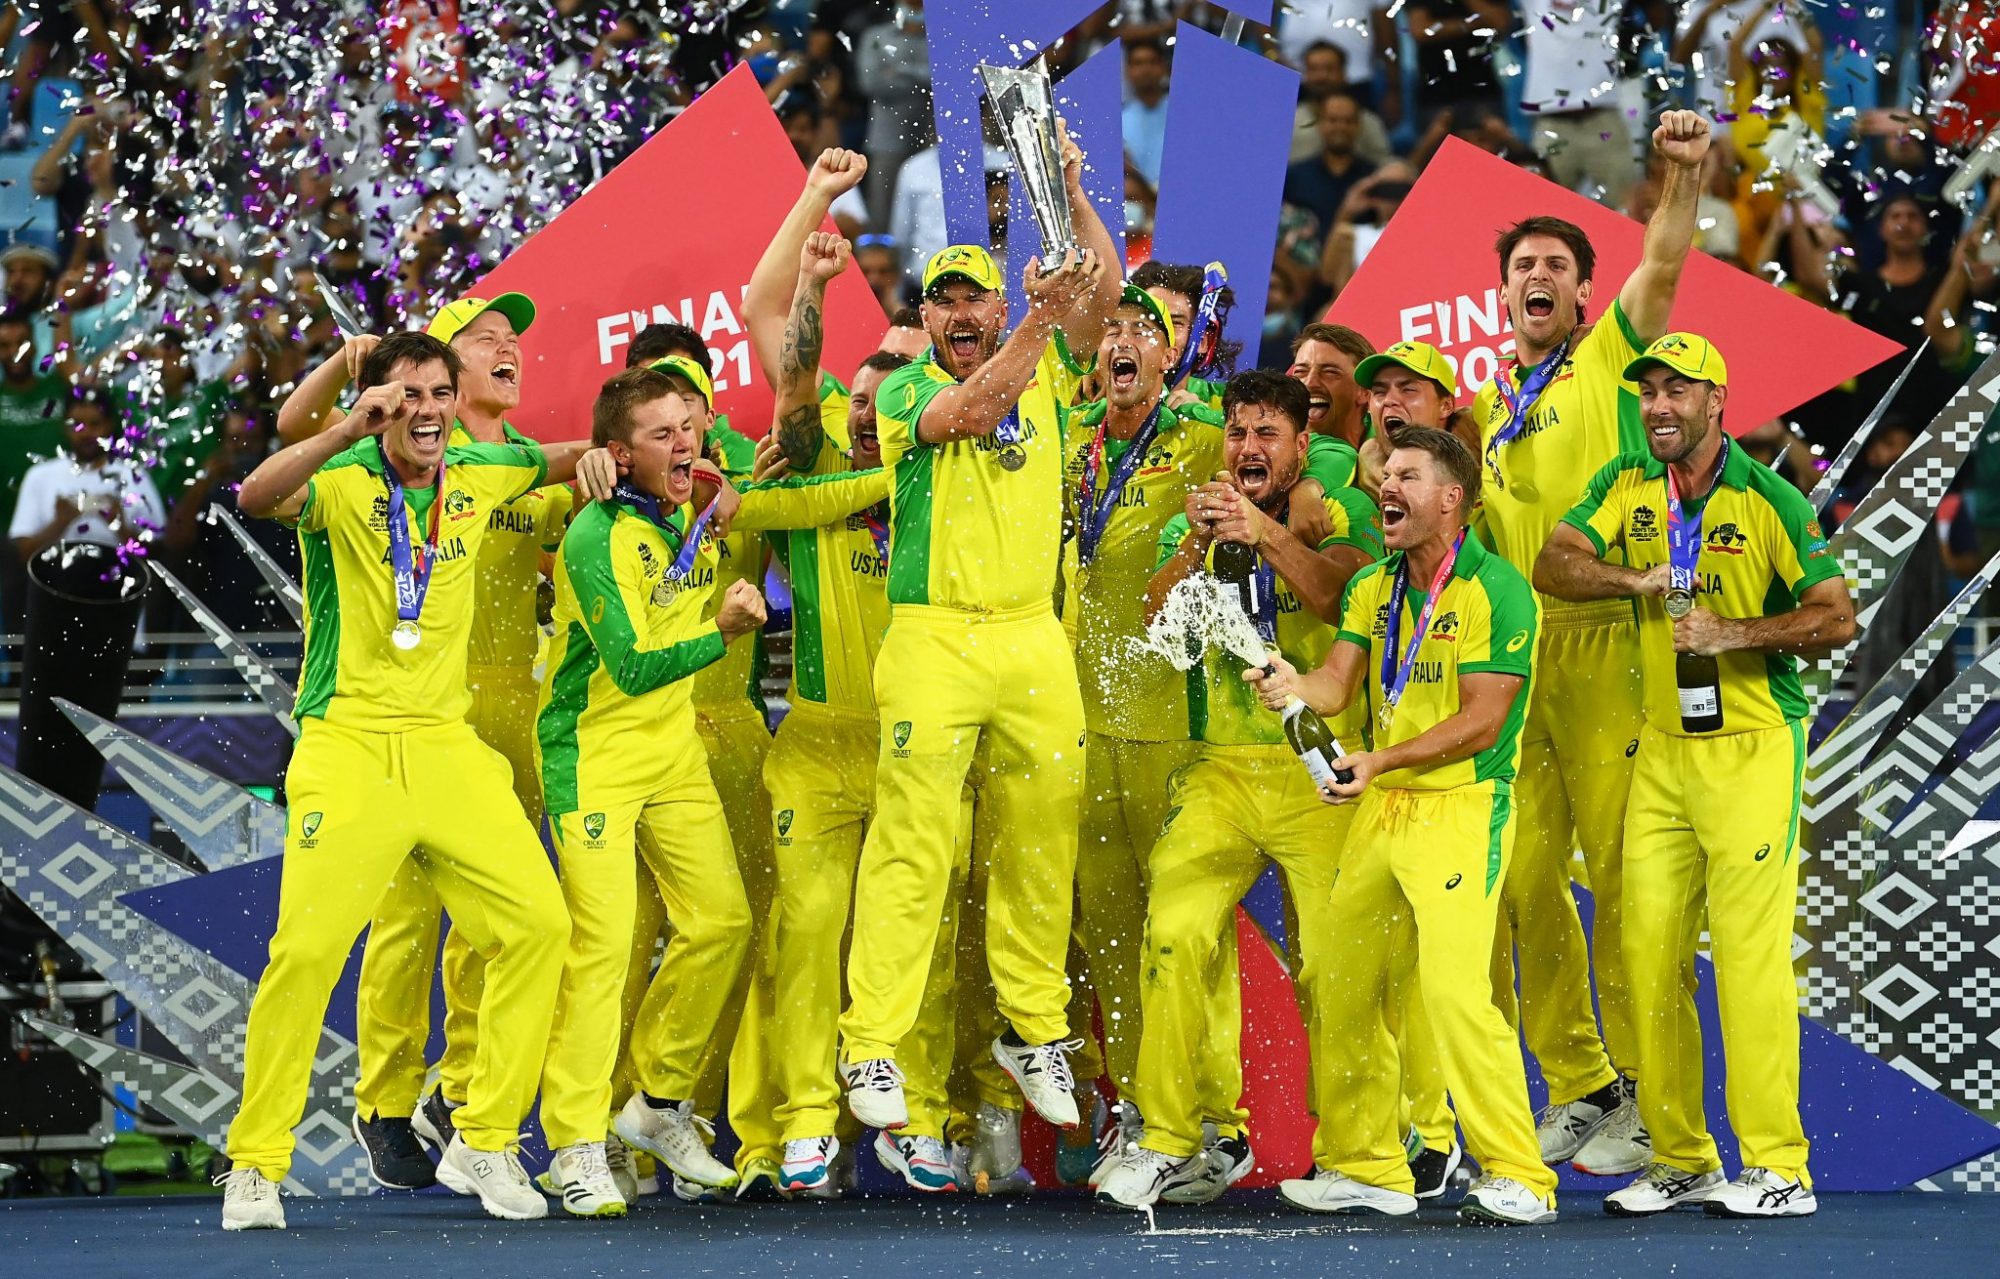 Twitter Reacts As Australia Lifts Their Maiden T20 World Cup Title With Comprehensive Win Over New Zealand